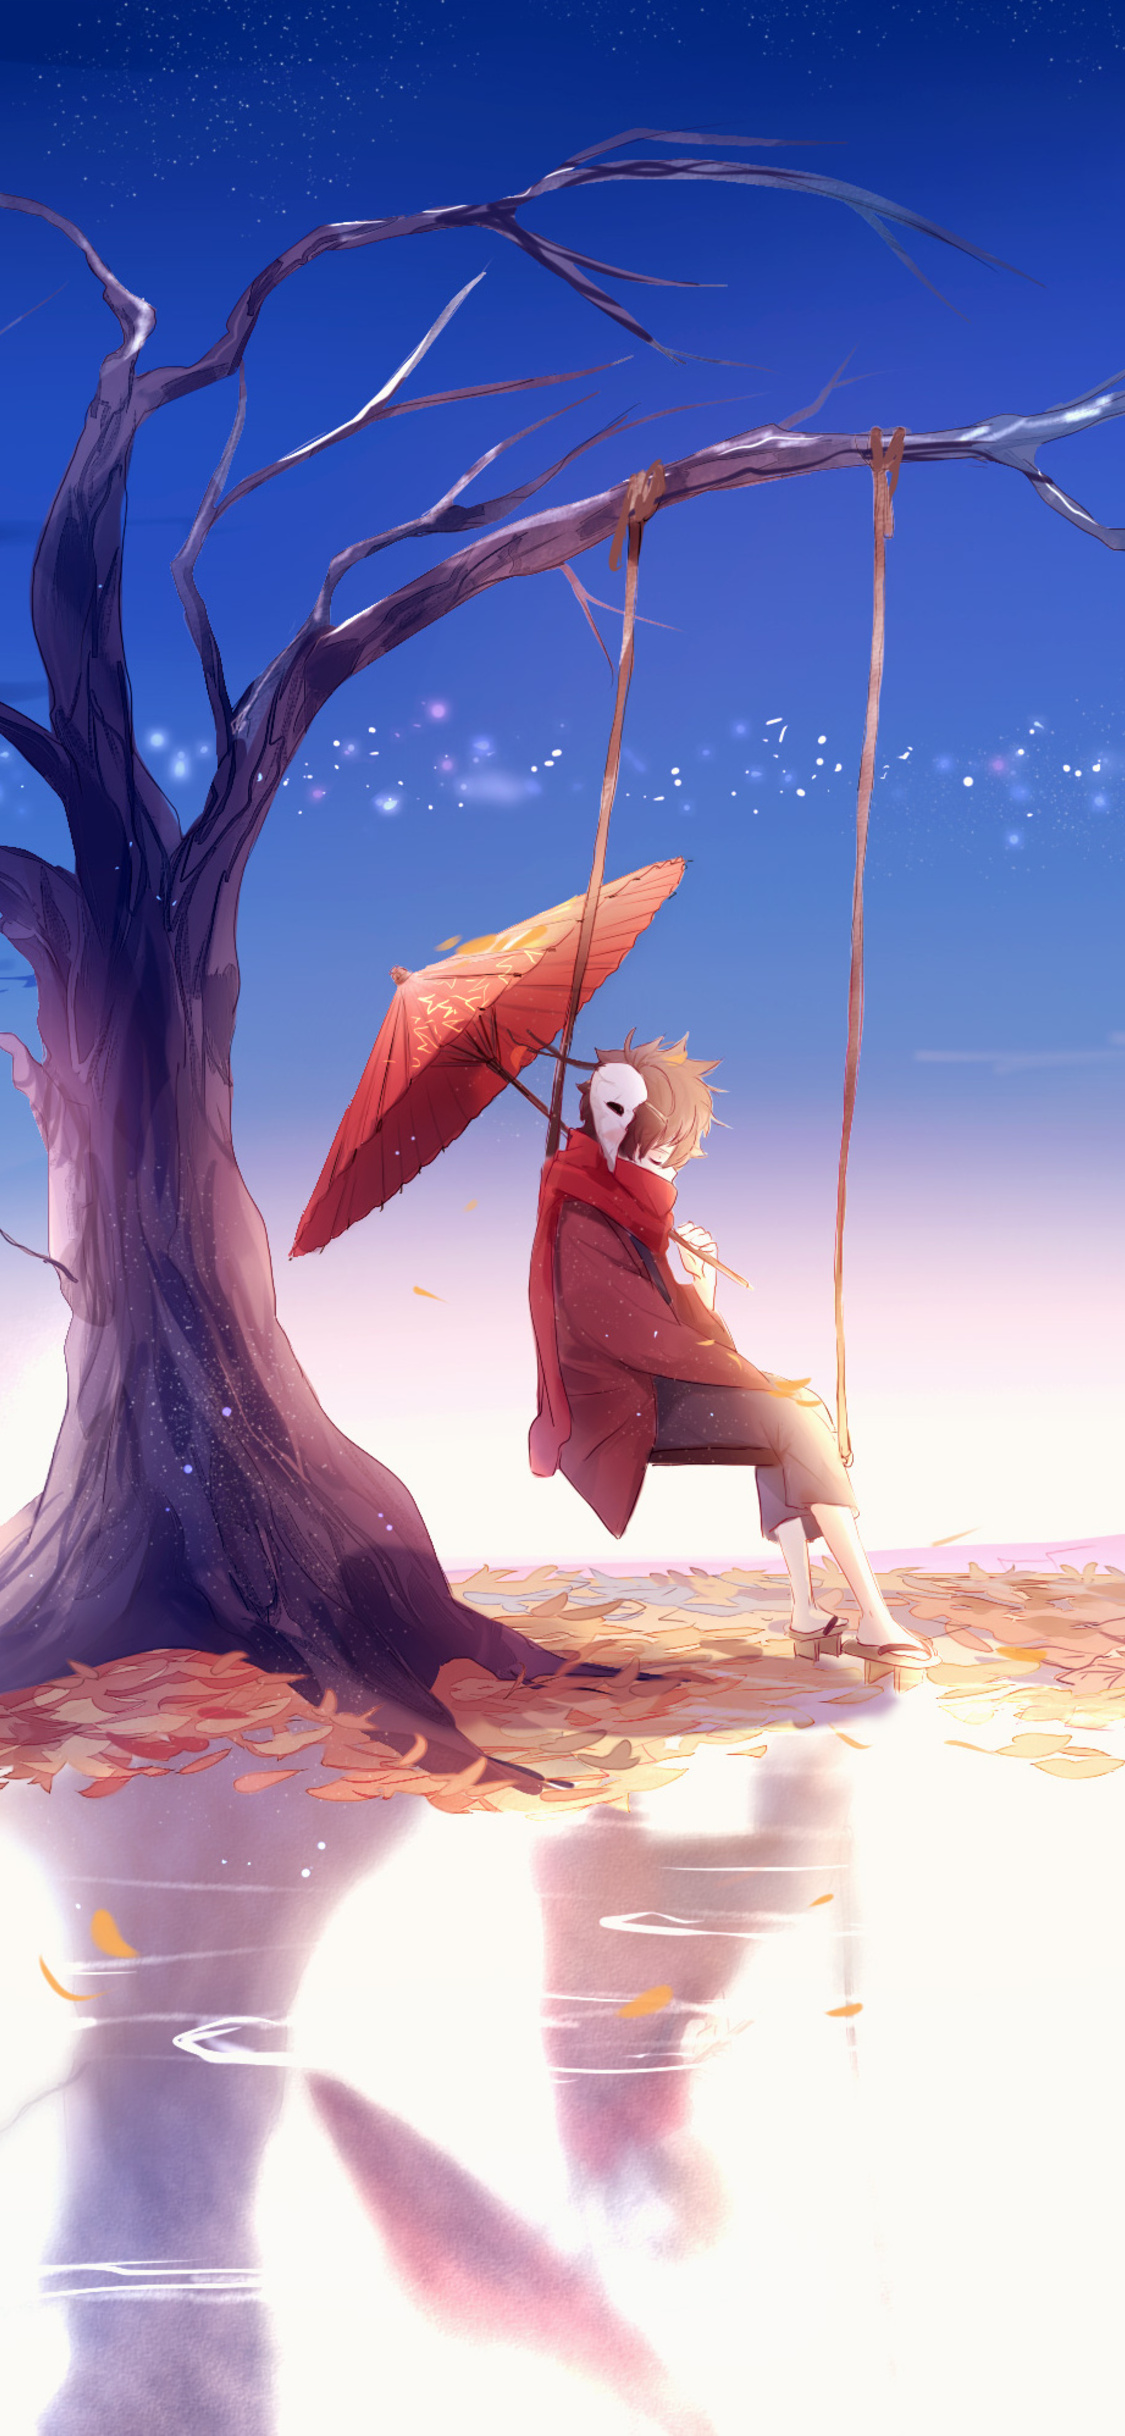 Anime Boy Swing Umbrella 4k iPhone XS, iPhone iPhone X HD 4k Wallpaper, Image, Background, Photo and Picture